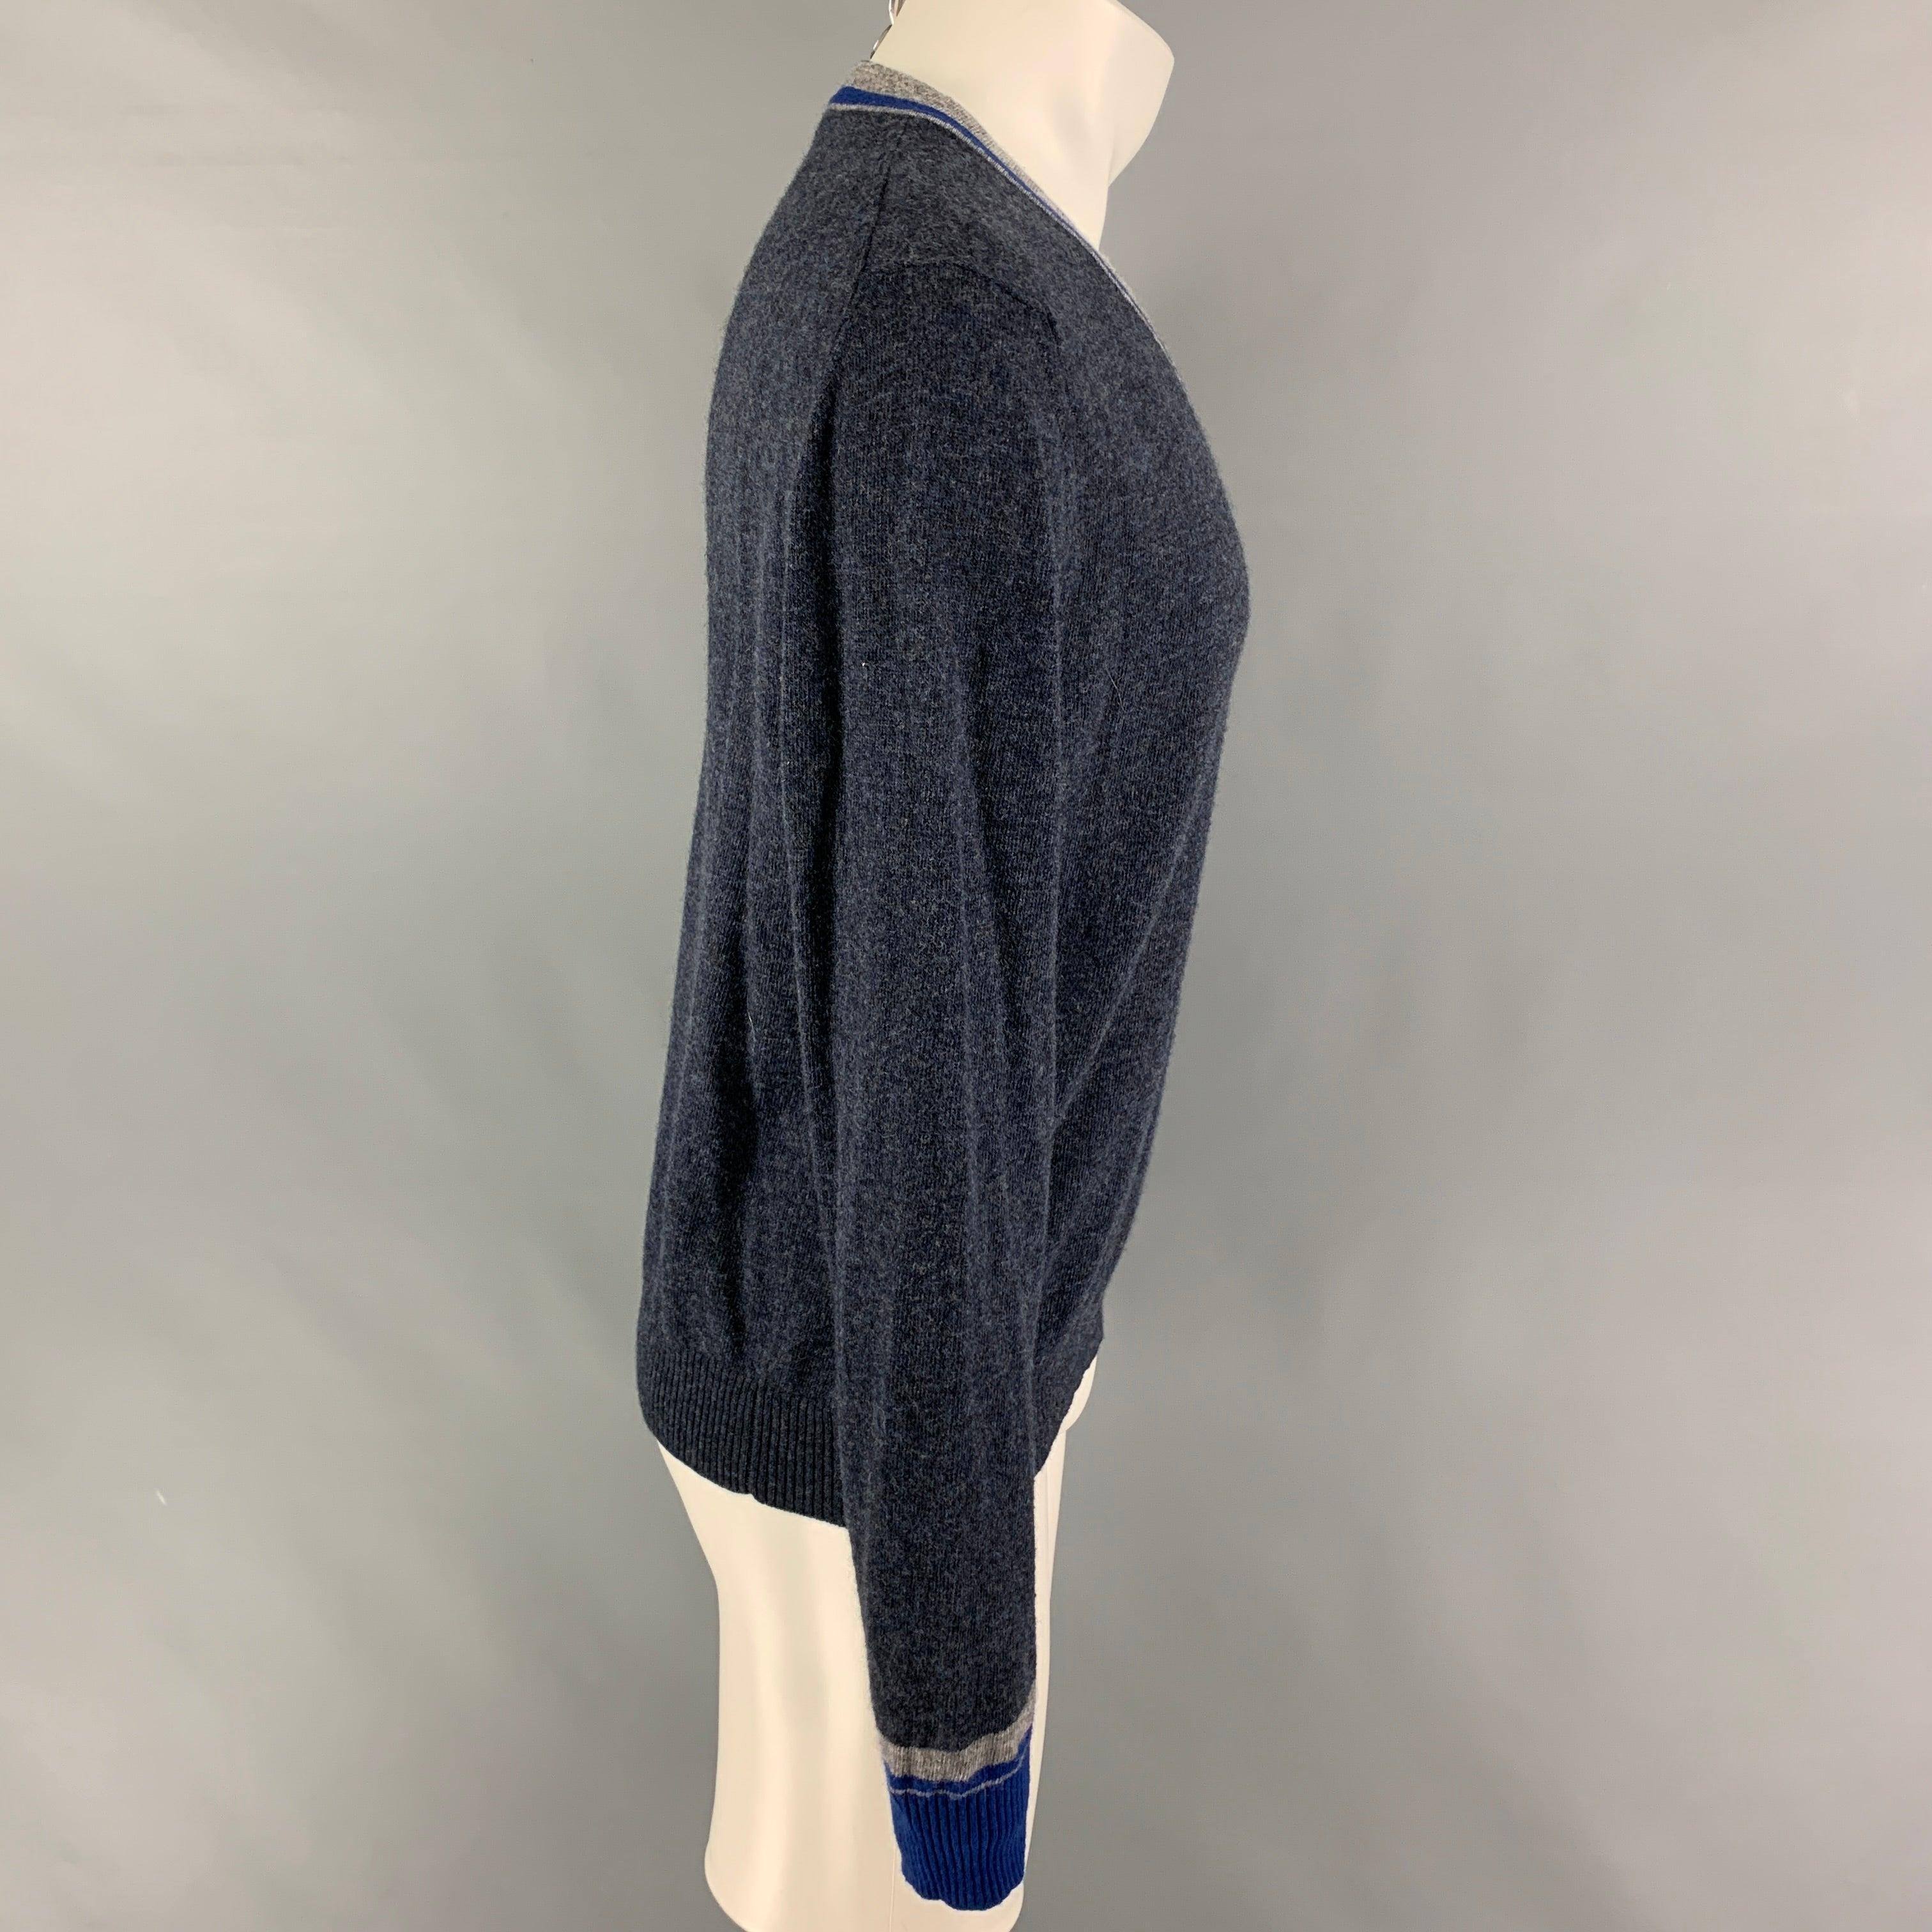 ETRO pullover comes in a blue & grey heather wool featuring a v-neck. Made in Italy.
Very Good
Pre-Owned Condition. Small hole at left shoulder.  

Marked:   M  

Measurements: 
 
Shoulder: 16 inches  Chest:
40 inches  Sleeve: 26.5 inches  Length: